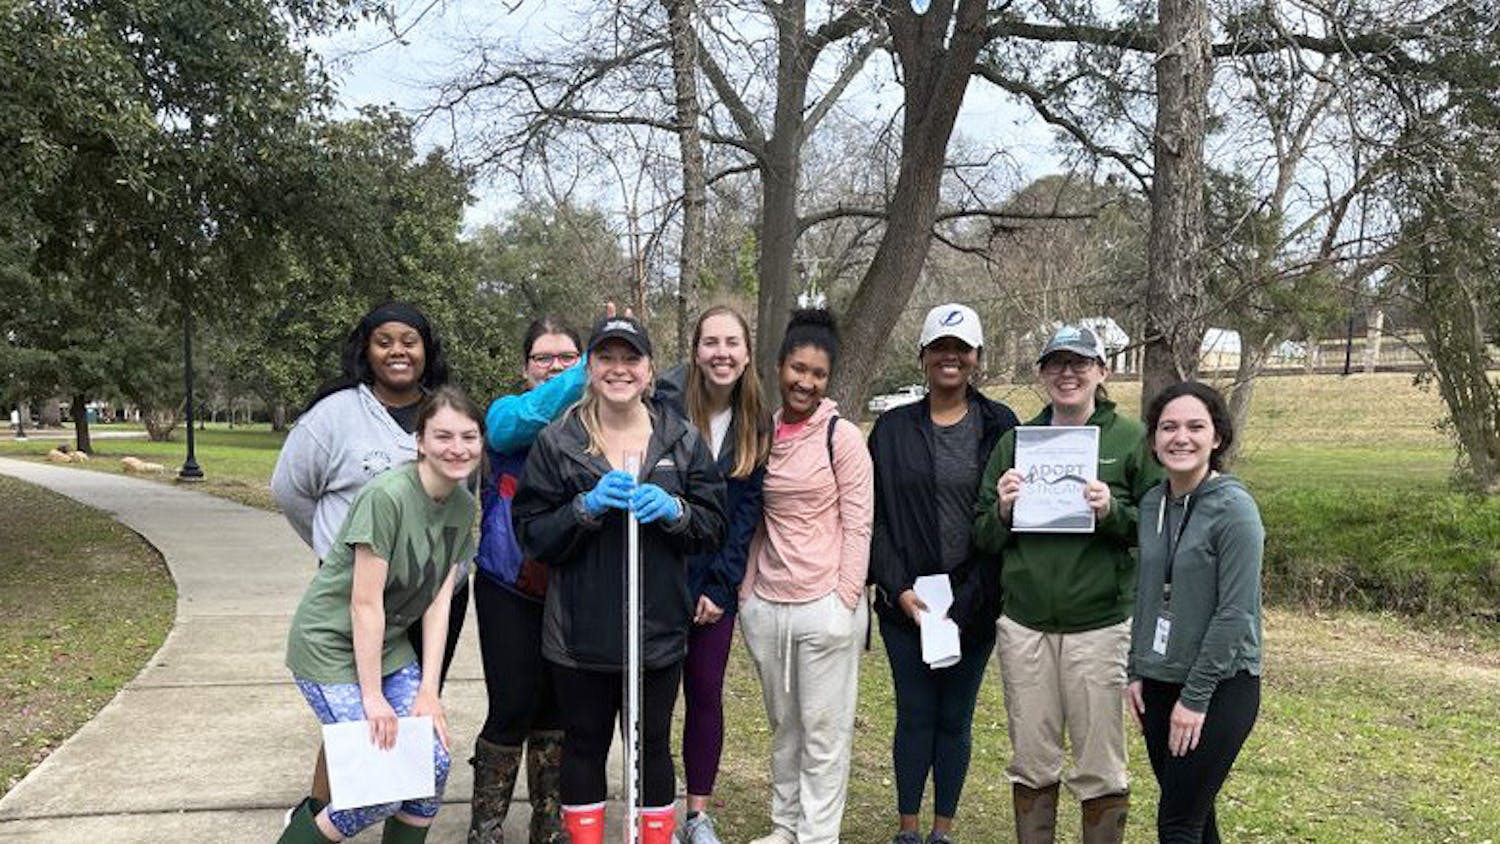 Members of the South Carolina section of the American Water Works Association and the Water Environment Association, also known as "Water Club," gather together after their Adopt a River cleanup on Feb. 18, 2023. The club promotes environmental education through clean-ups and water quality testing.&nbsp;